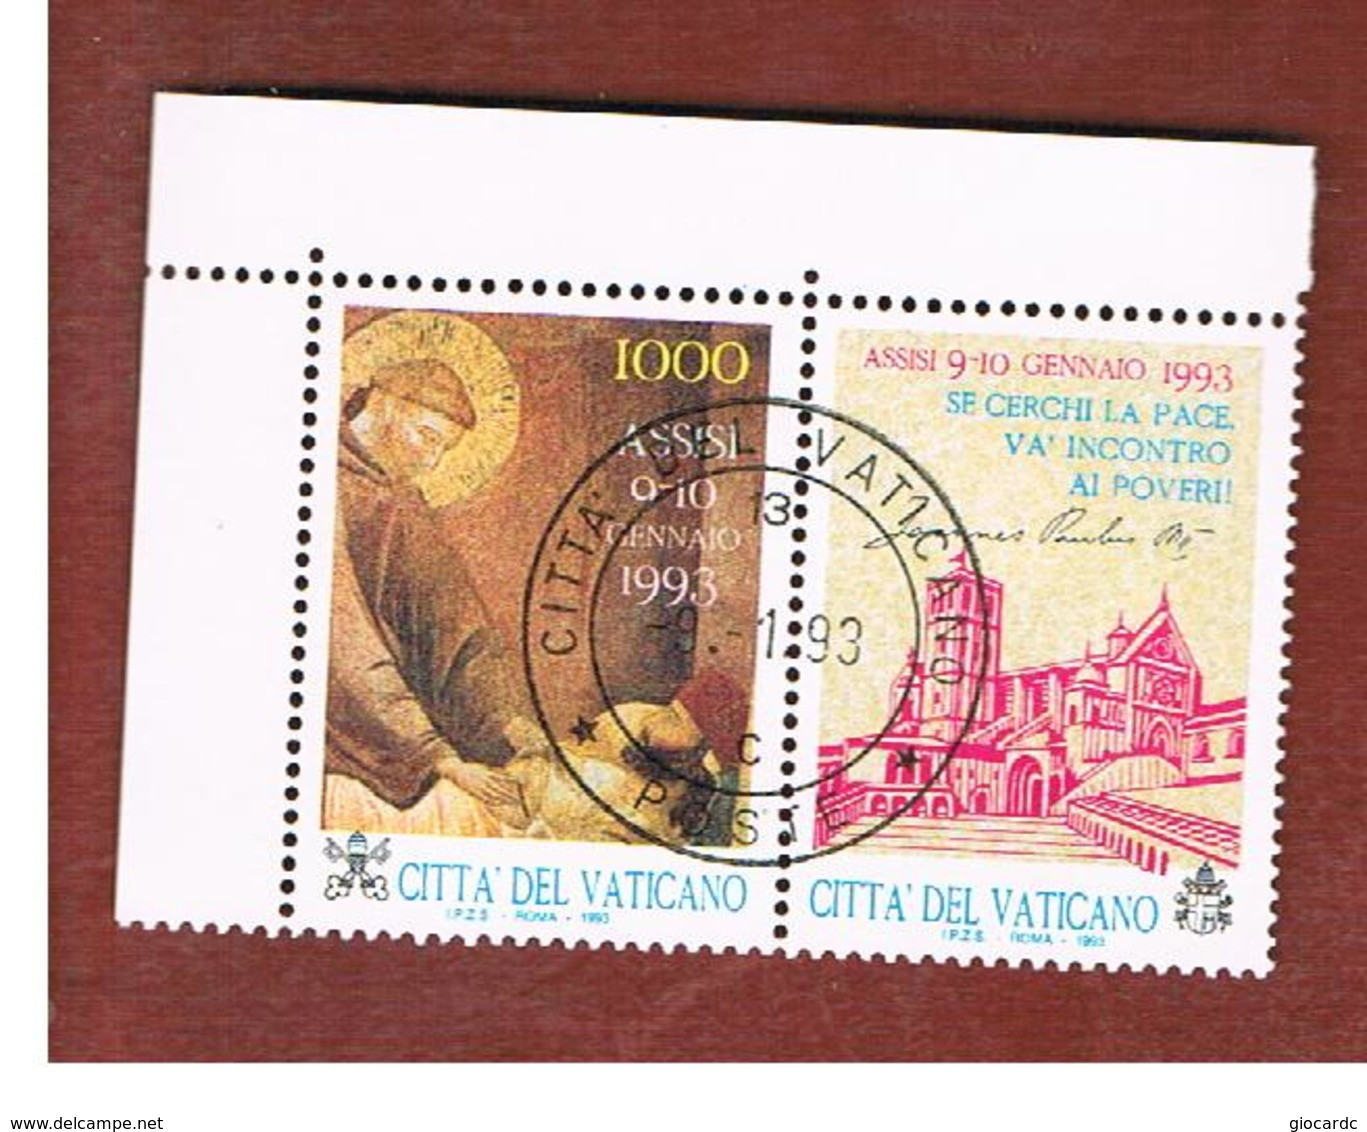 VATICANO - VATICAN - UNIF. 953  - 1993 ASSISI: PACE IN EUROPA (CON APPENDICE)  - (USED°) - Used Stamps